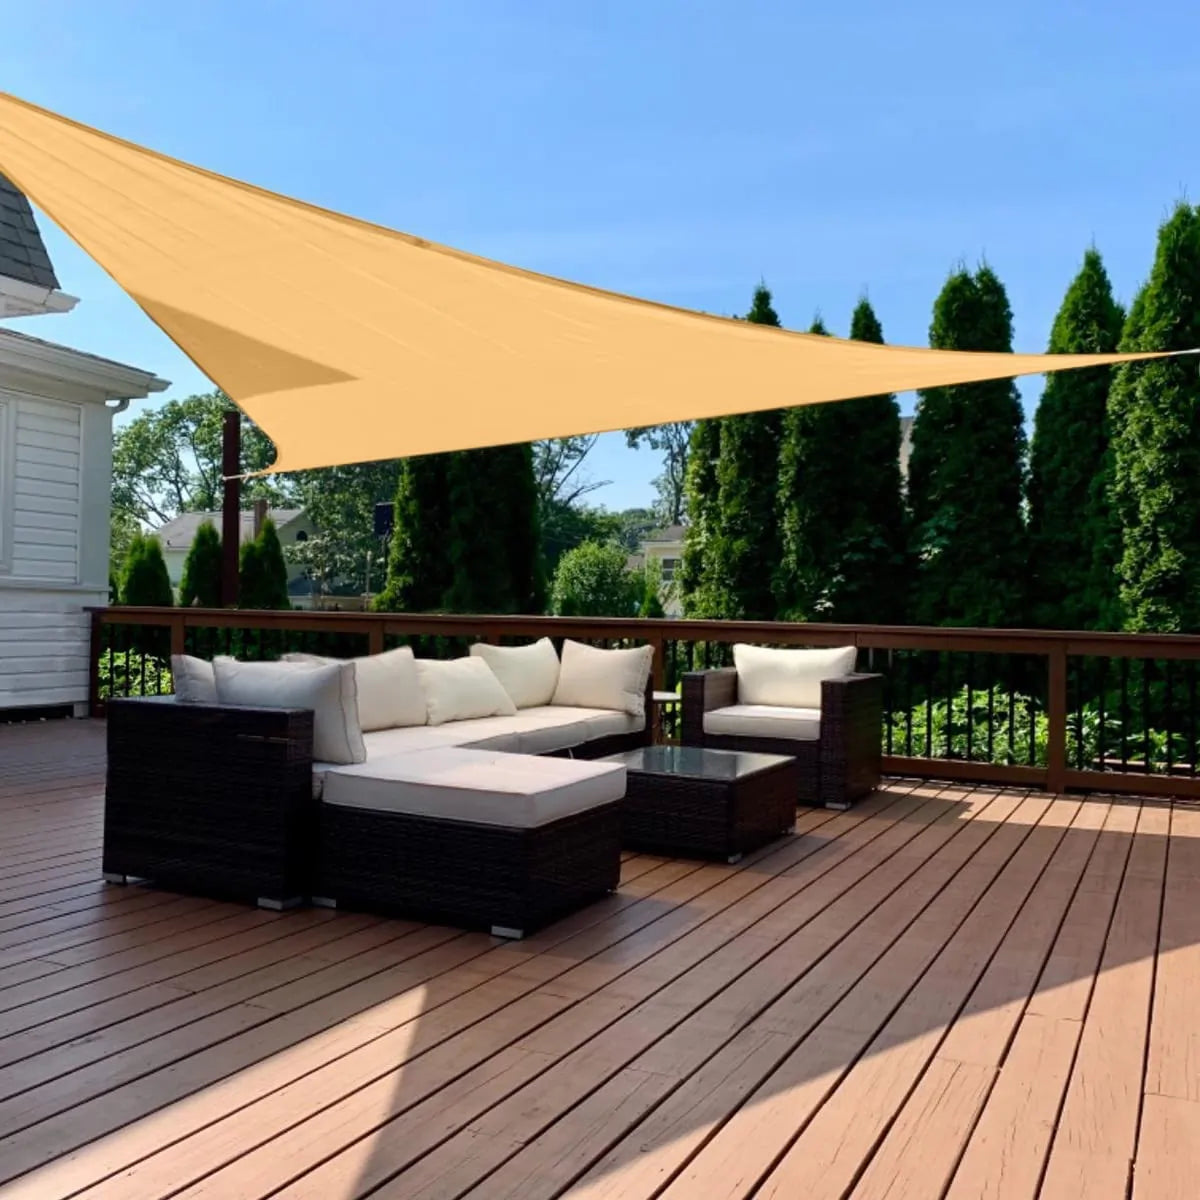 Fire retardant triangle shade sail for deck#size_16X16X16 FT